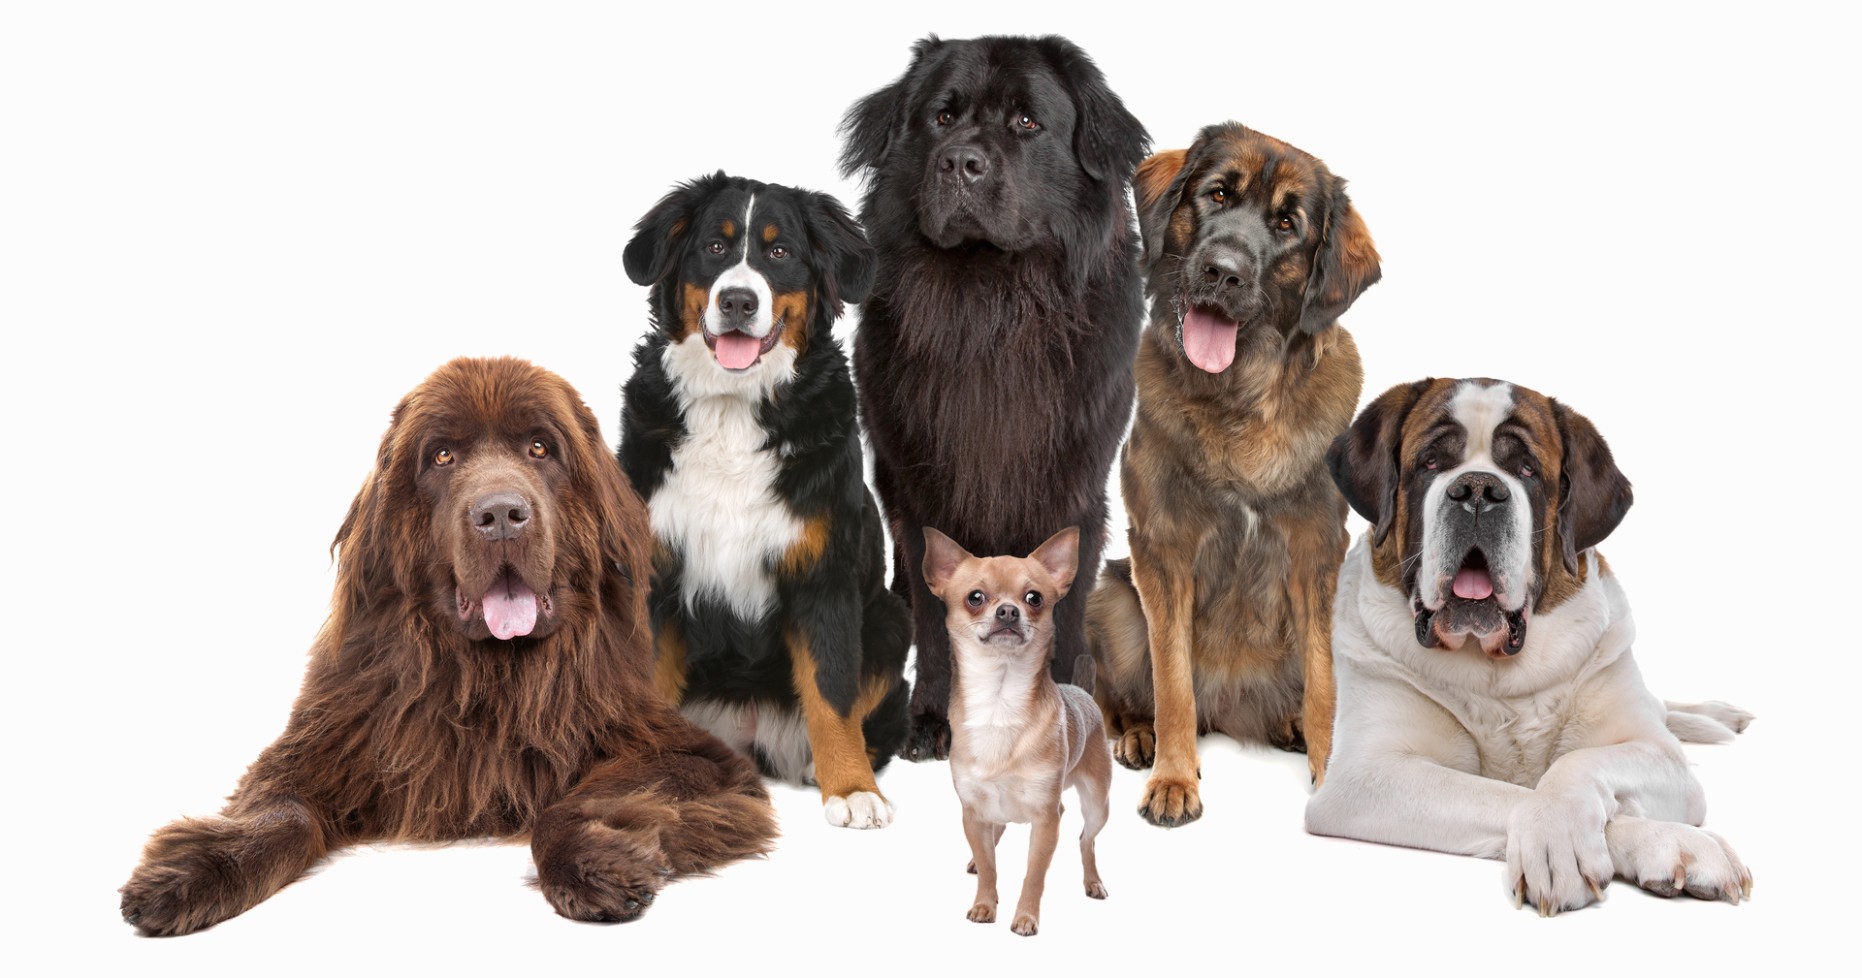 1517669994 Blue Ribbon K7 Academy Dog Trainer Puppy Service And Therapy Dogs.jpg